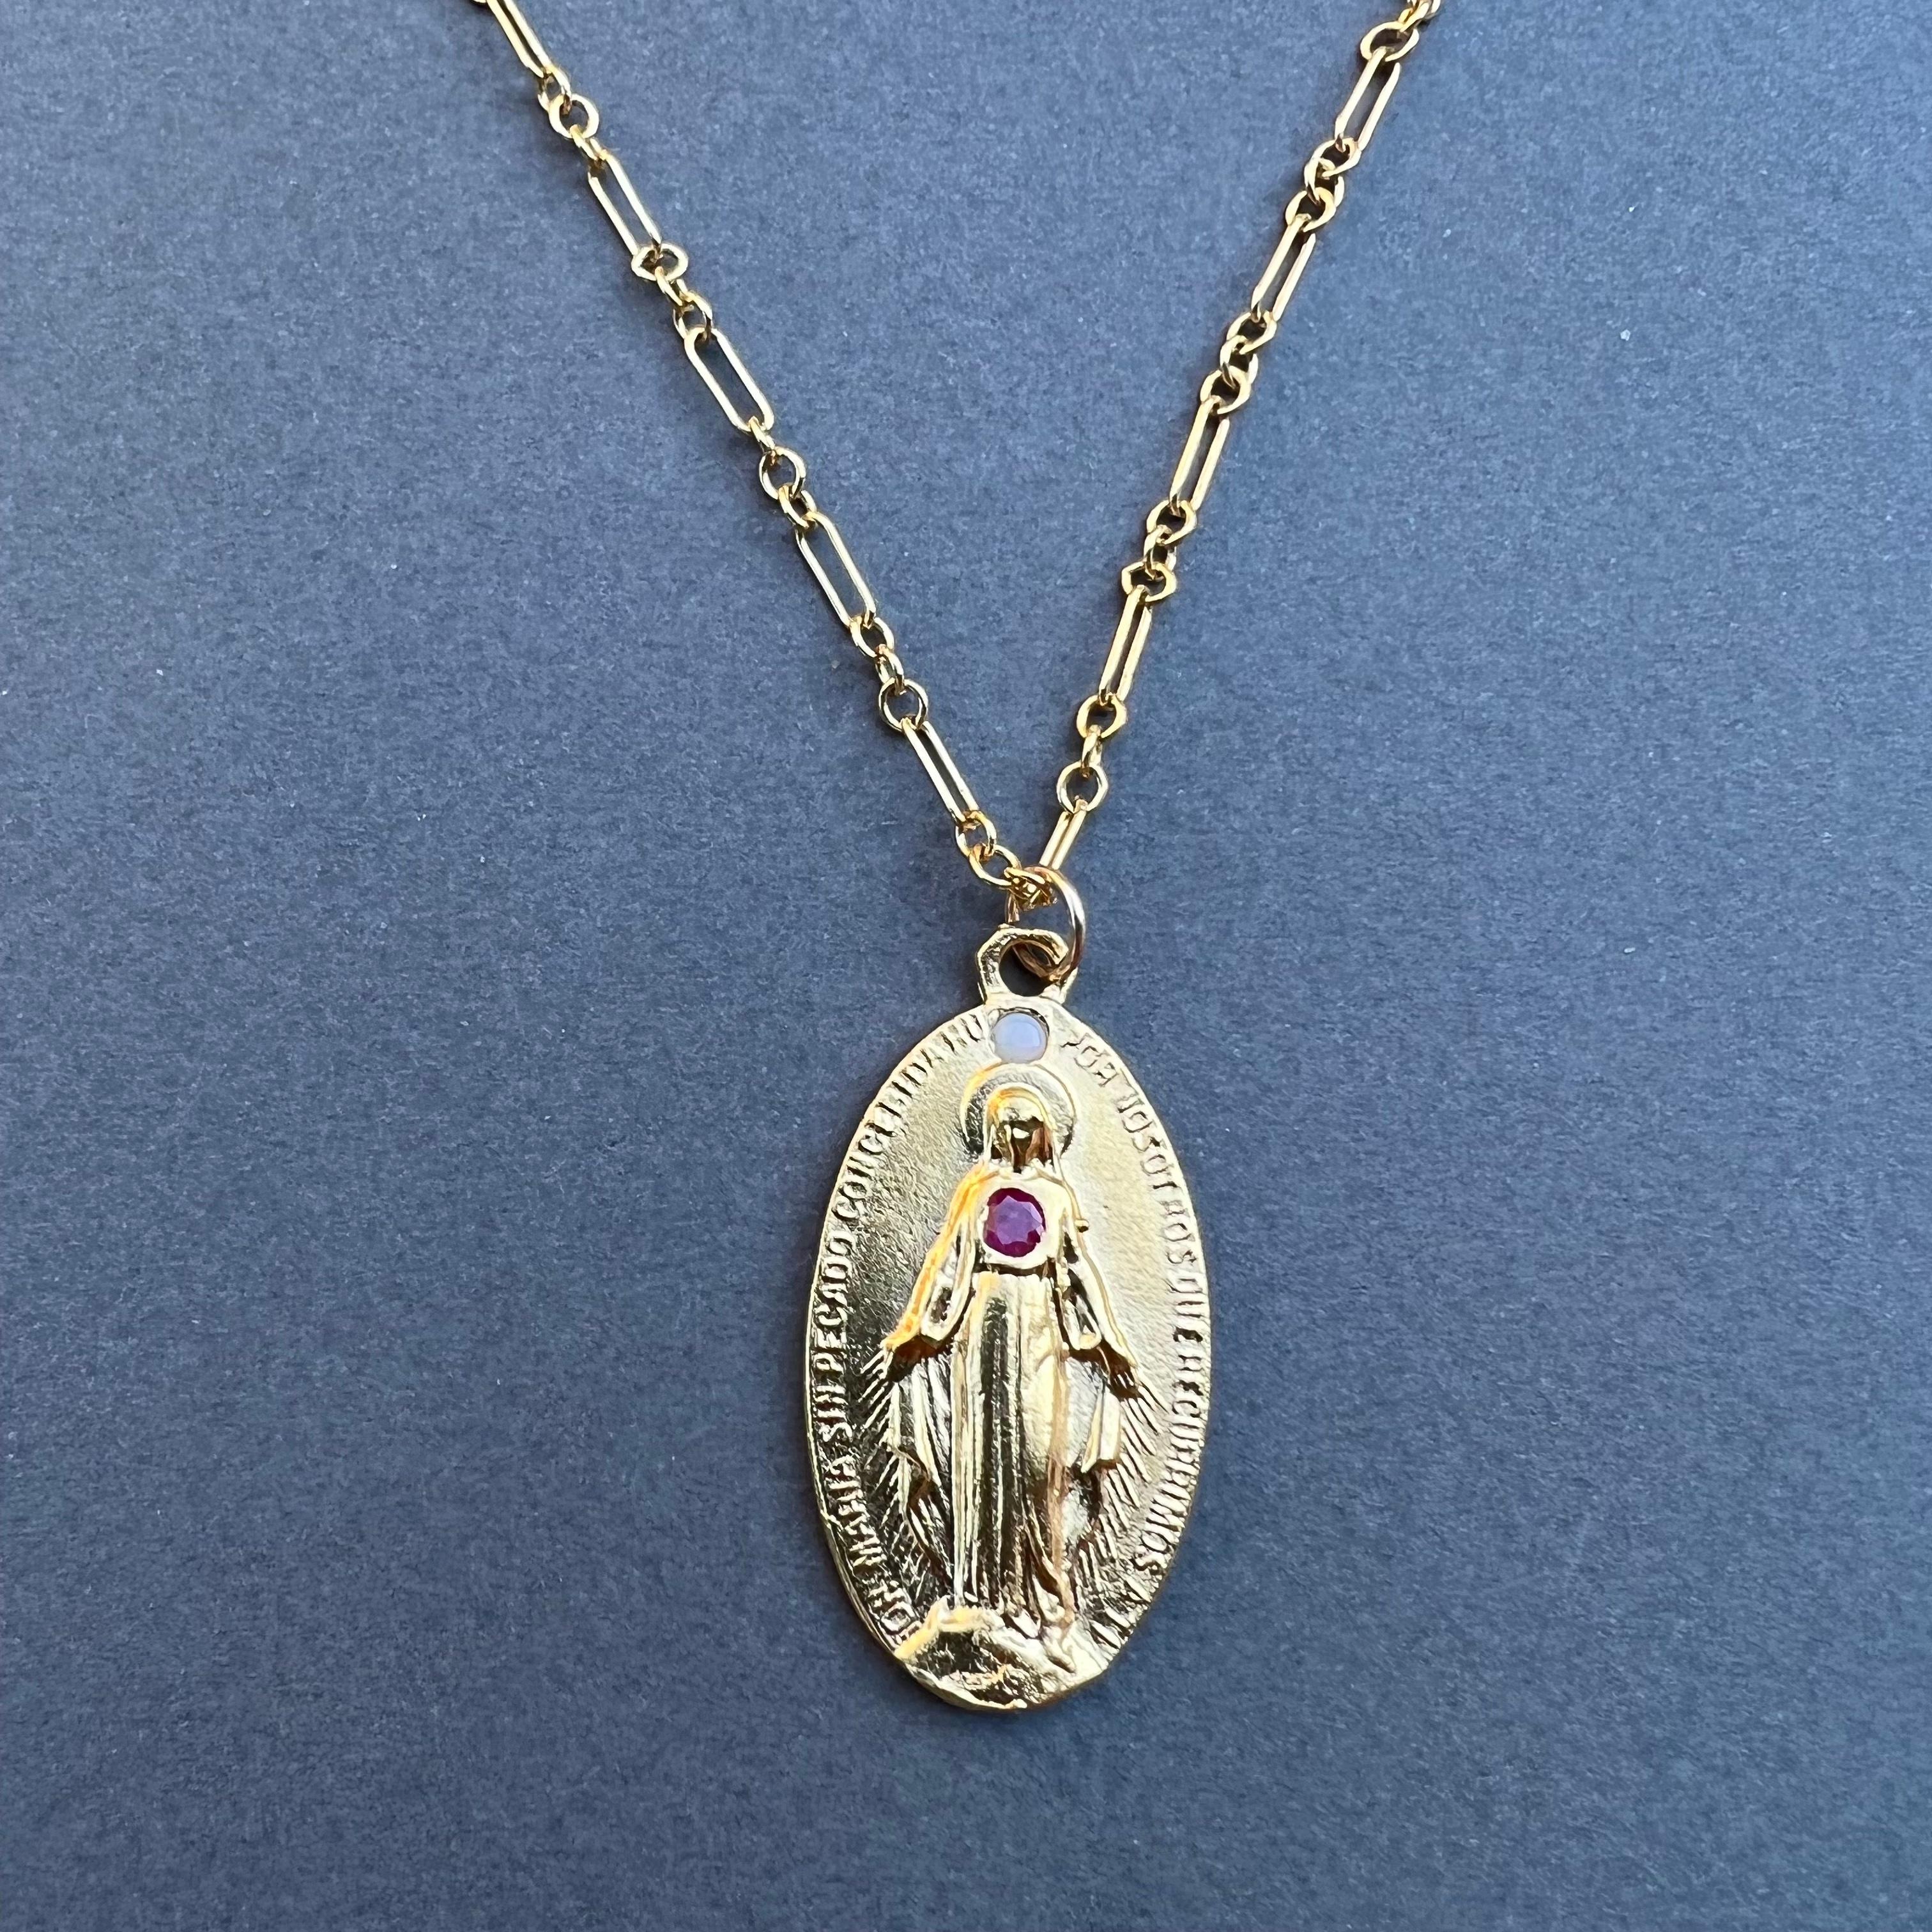 Virgin Mary Ruby Opal Medal Chain Necklace J Dauphin For Sale 3